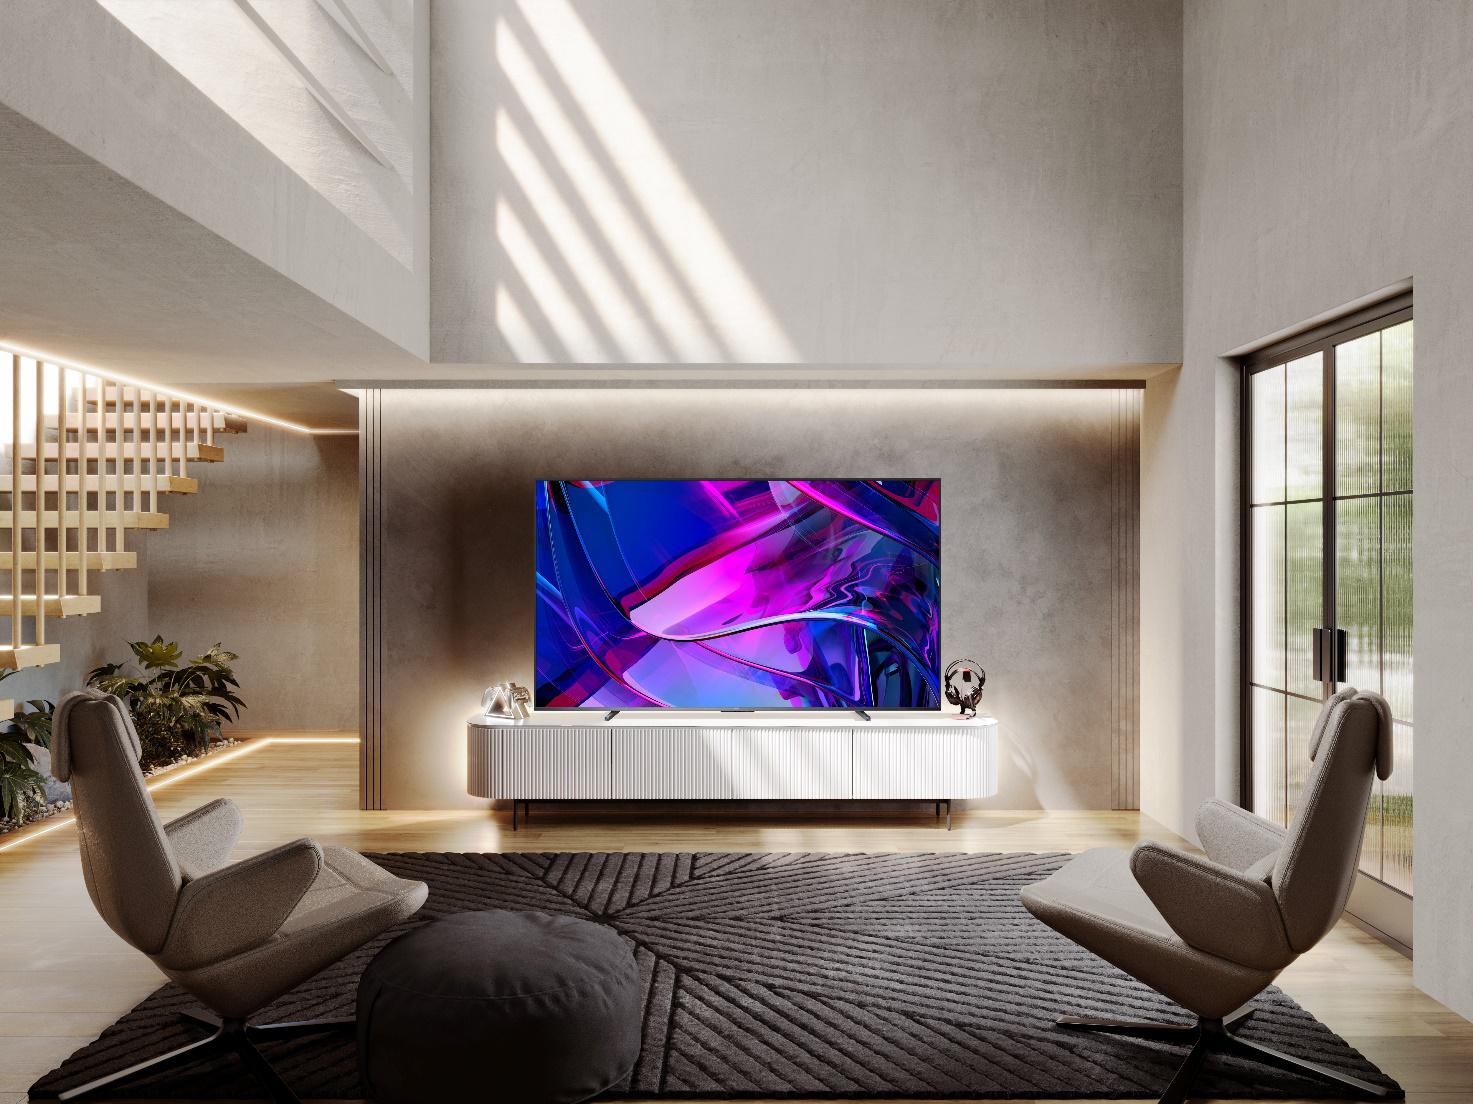 Hisense introduces revolutionary TV featuring Qled technology and 100-inch screen